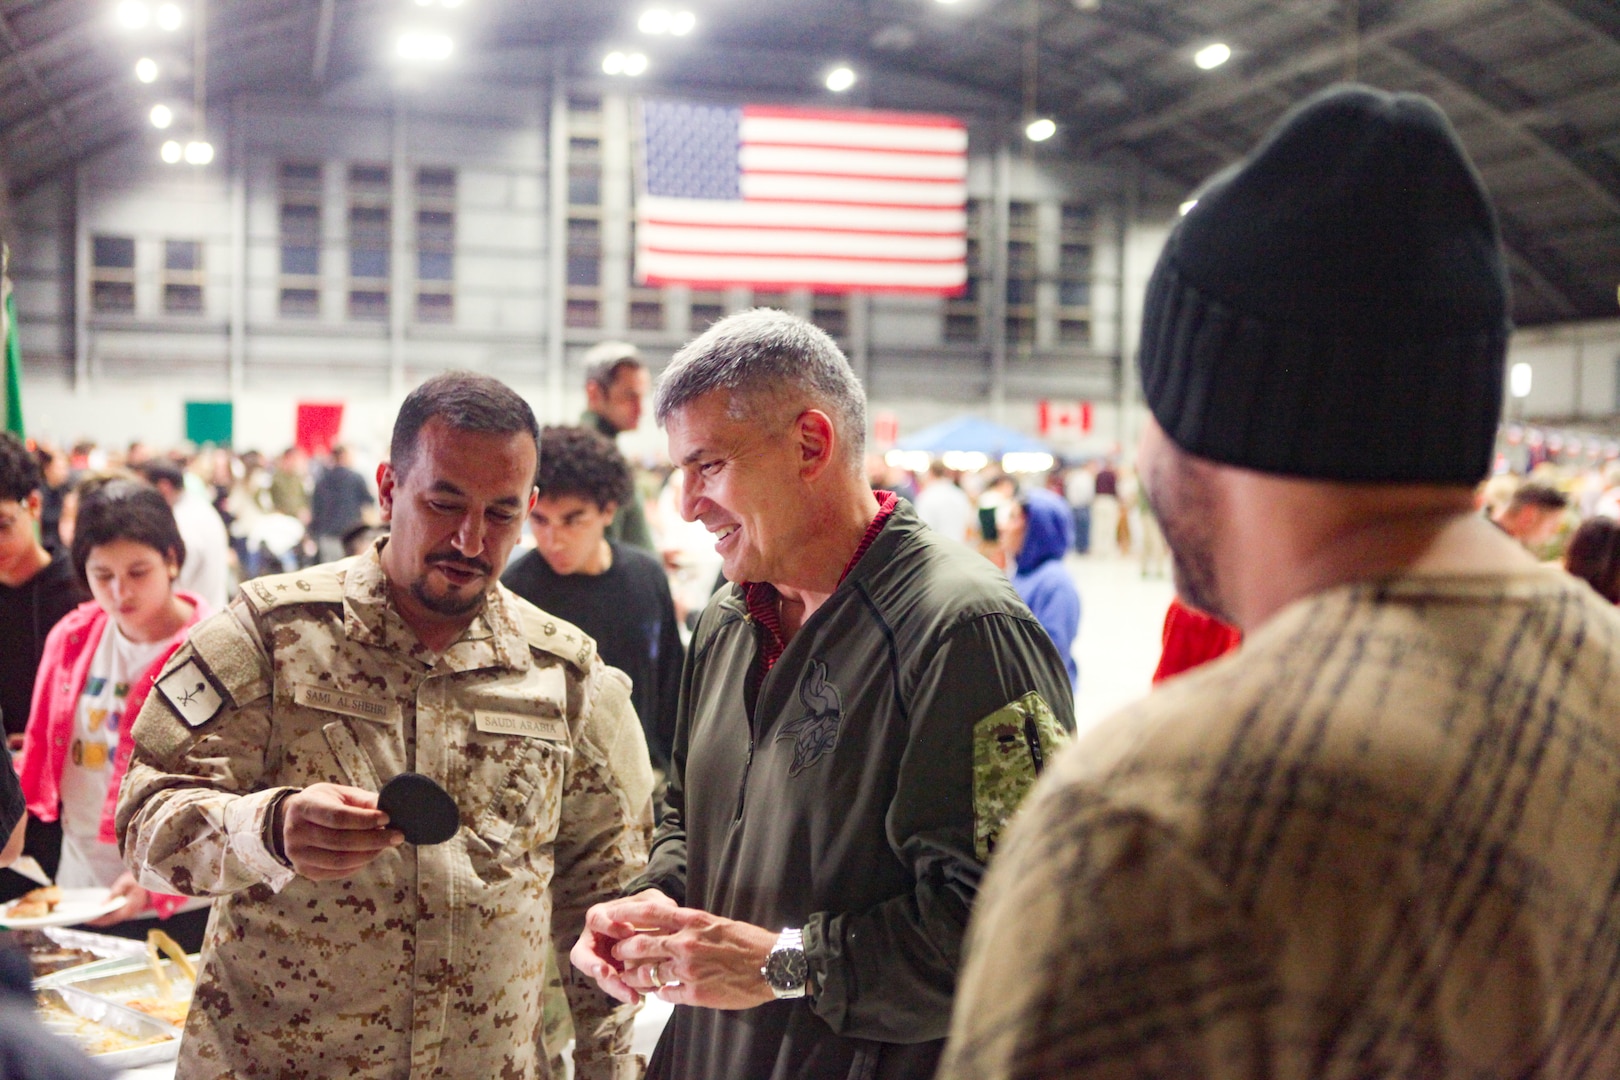 TAMPA, Fla. – A Saudi Senior National Representative (left) shows off an item during U.S. Central Command’s (CENTCOM) International Night, Dec. 07, 2023. International Night started in December 2004 as a winter holiday party for the Coalition members and families. This year, members of CENTCOM’s coalition countries displayed native customs and offered a taste of their traditional cuisines to guests. (U.S. Central Command Public Affairs photo by Maged Benjamin-Elias)